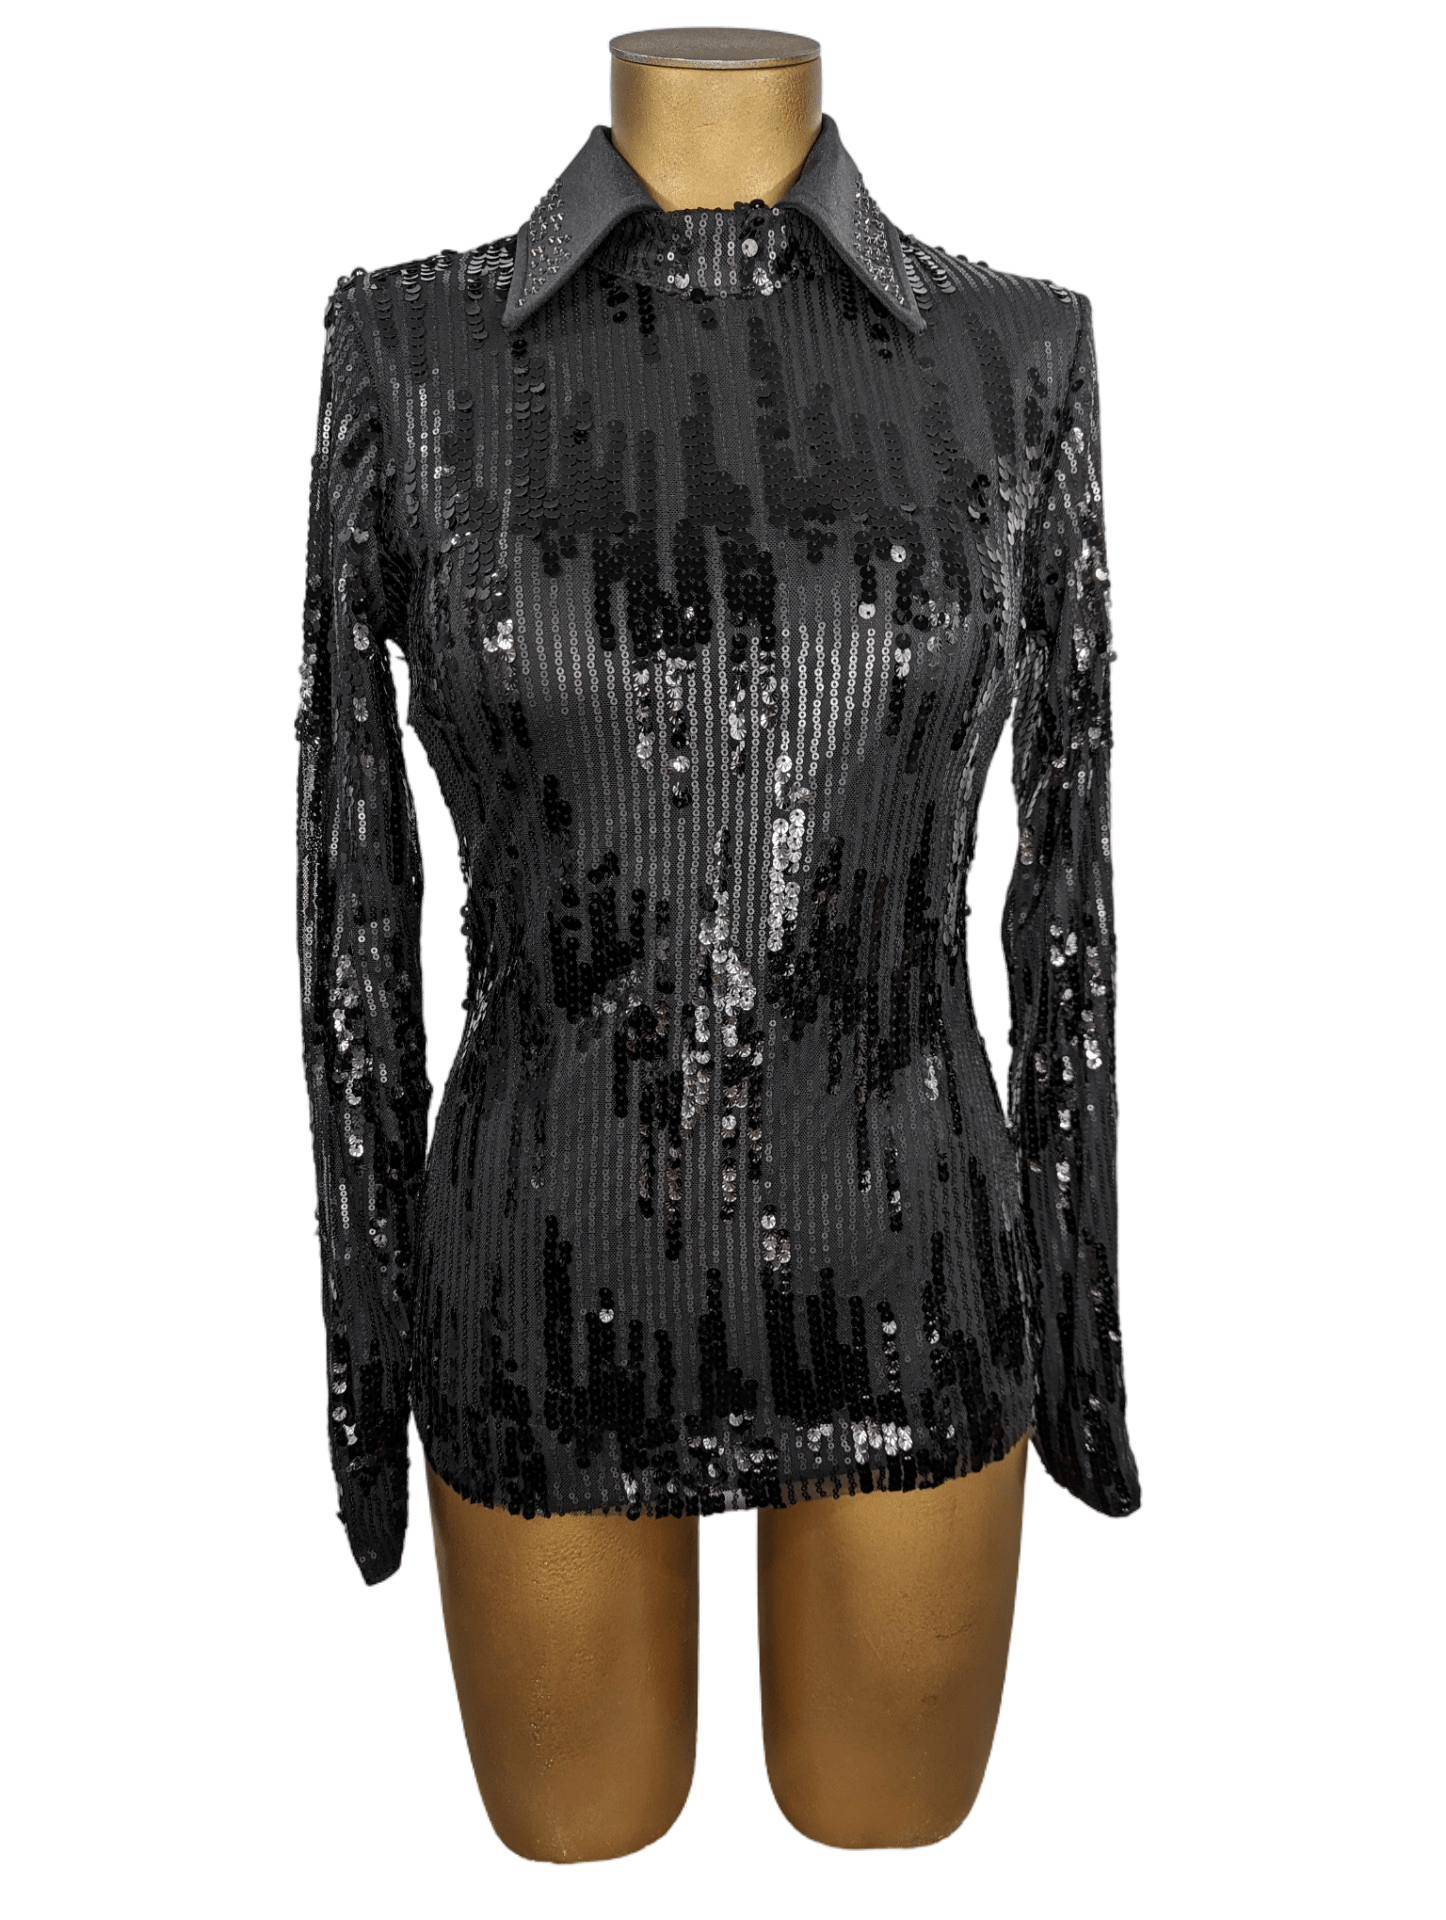 sparkle-ridge-womens-western-wear-affordable-show-clothes-horse-shirts-with-bling-rodeo-bodysuit-jet-black-sequin-heiress-front.png (Copy)